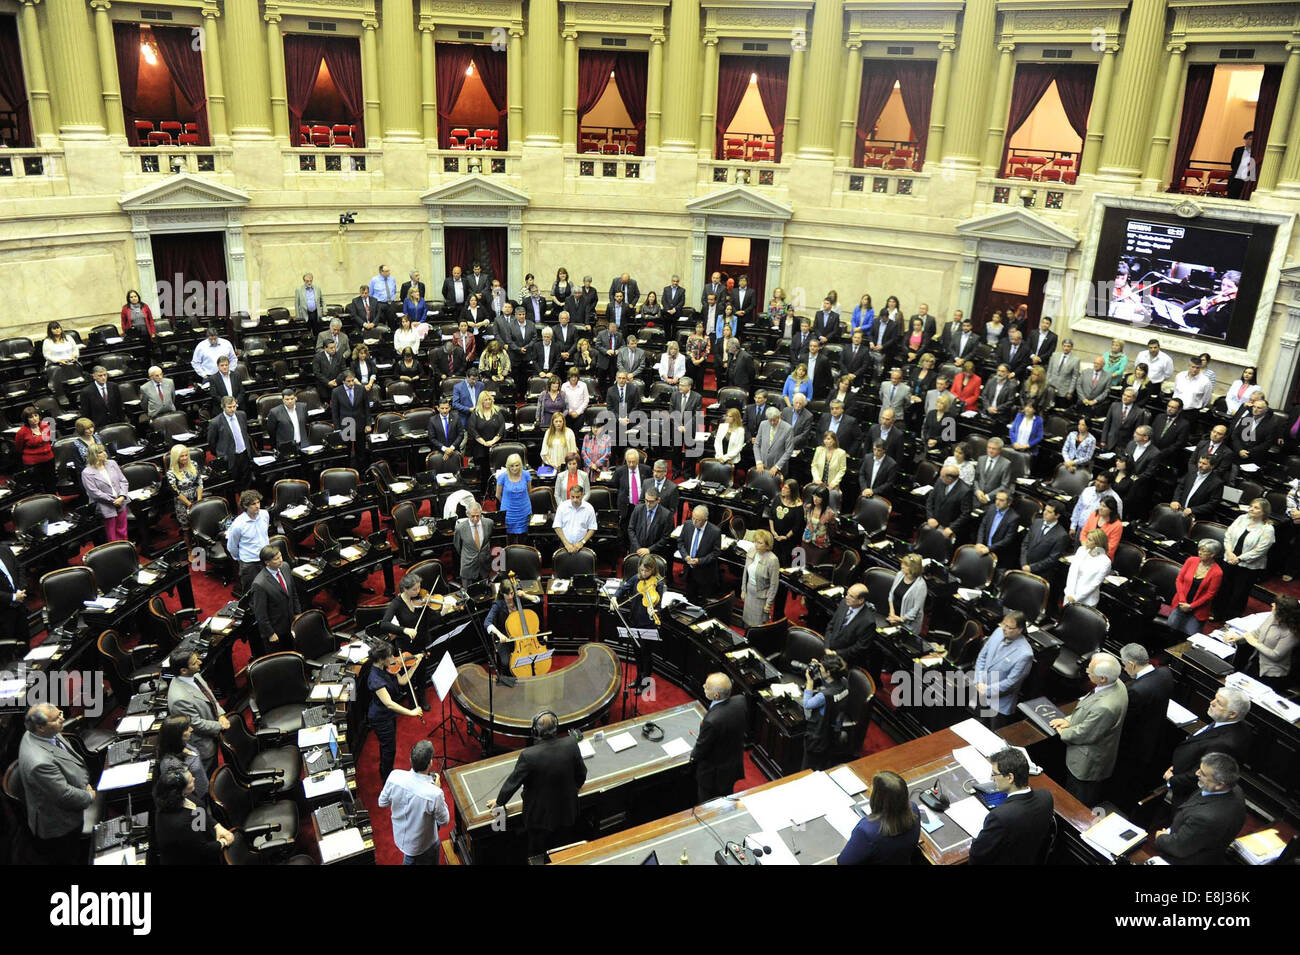 Buenos Aires, Argentina. 8th Oct, 2014. Deputies participate in a special session for the project of Budget for 2015, in the precincts of the House, in Buenos Aires, Argentina, on Oct. 8, 2014. © Fernando Sturla/TELAM/Xinhua/Alamy Live News Stock Photo